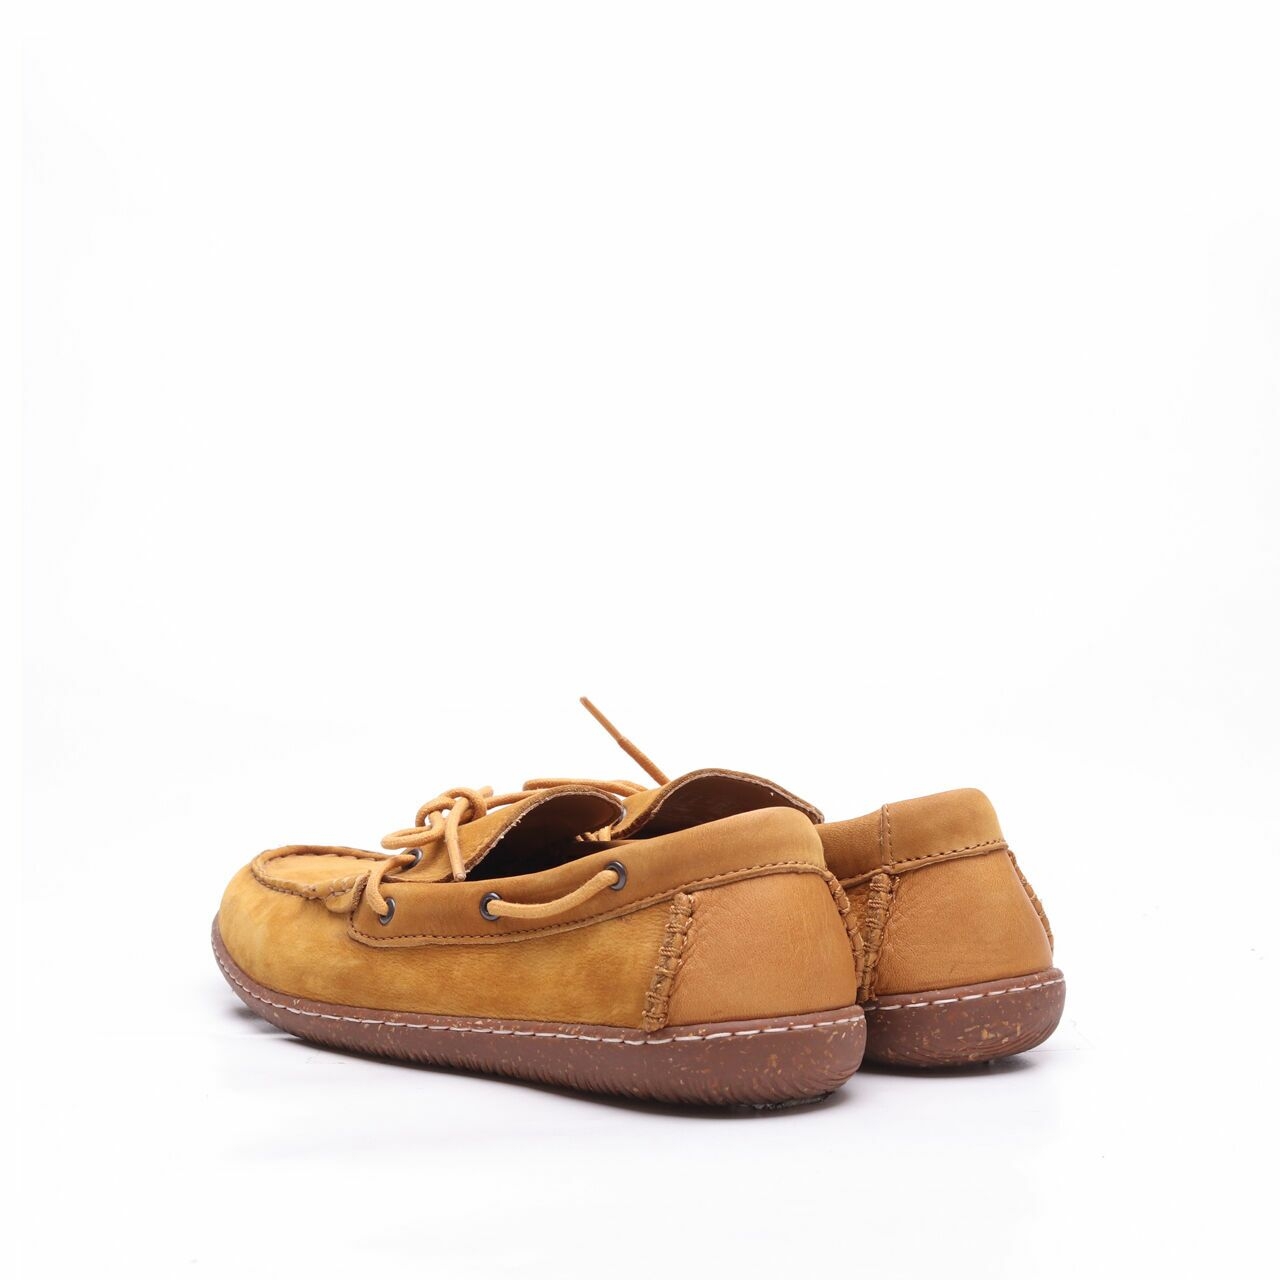 Clarks Mustard Loafers